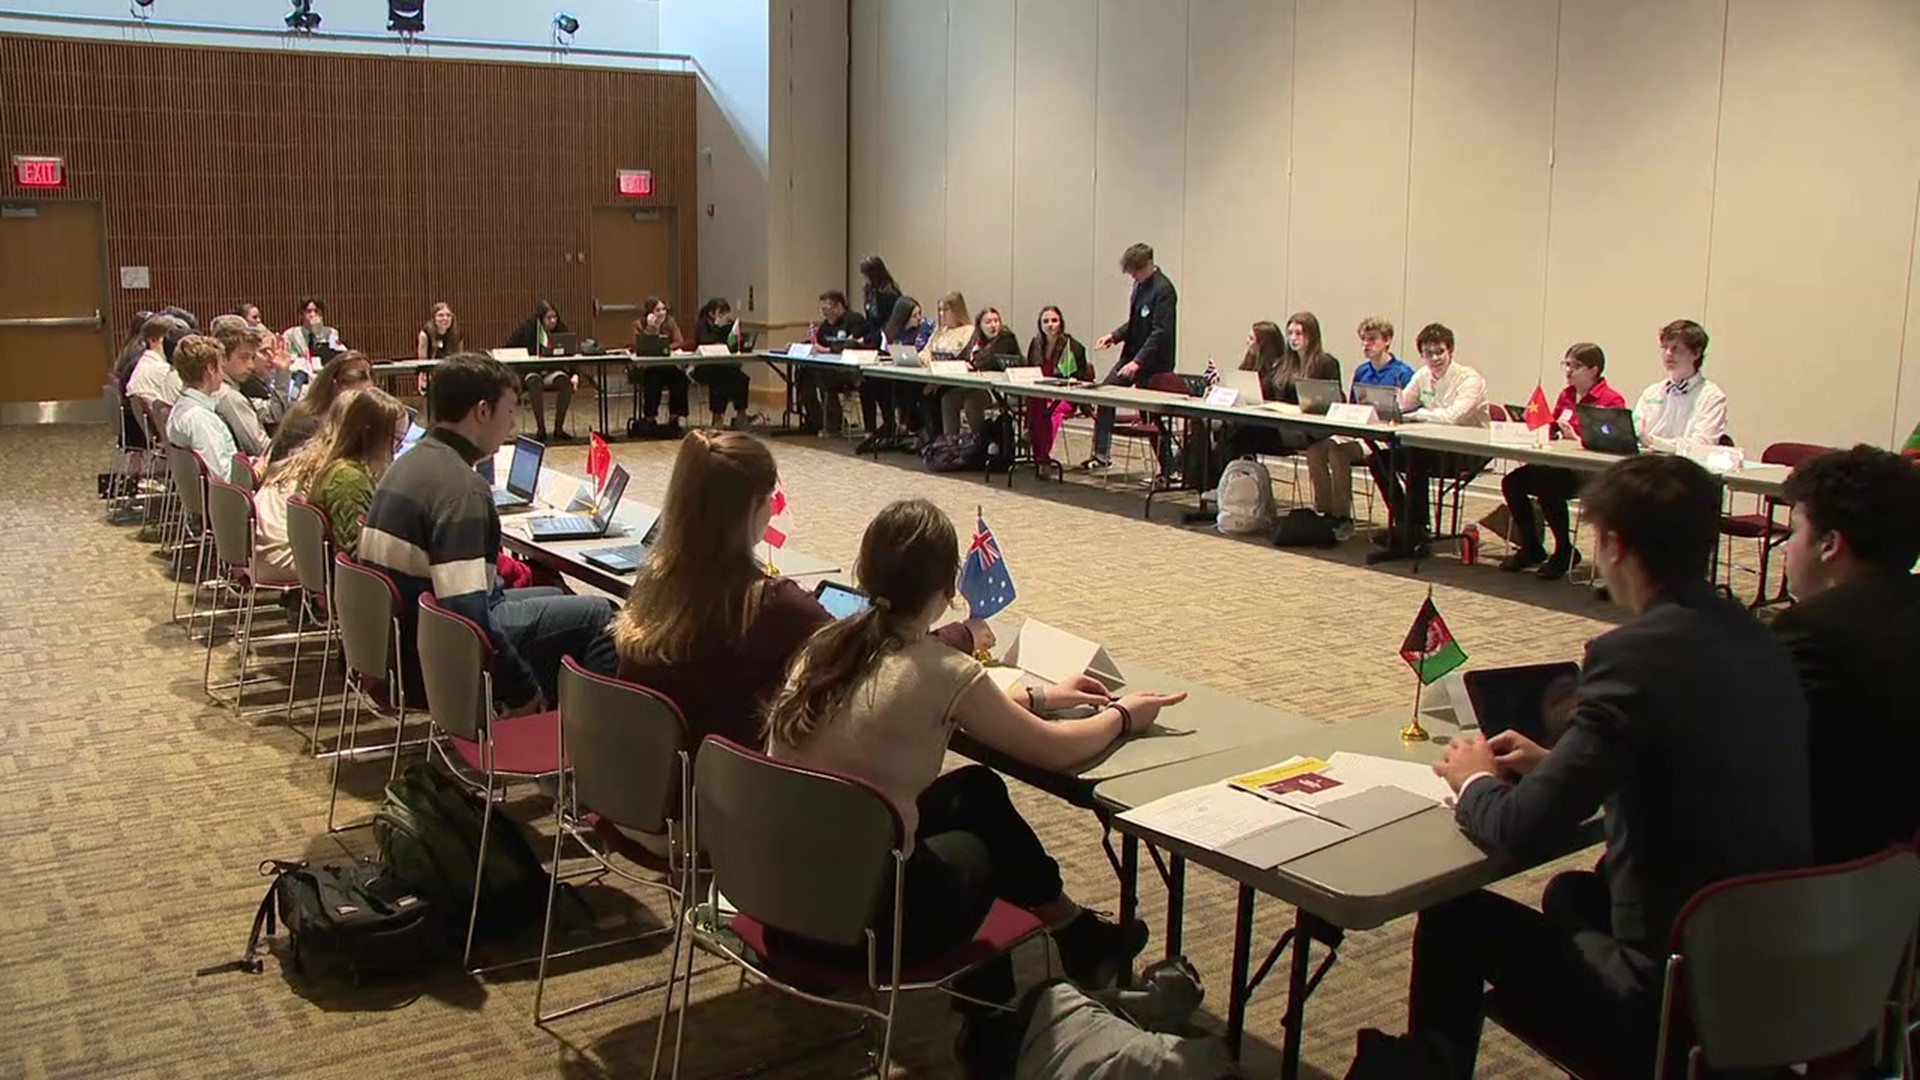 150 high school students learned what it's like to debate current events on an international stage at Bloomsburg University's Model UN conference.